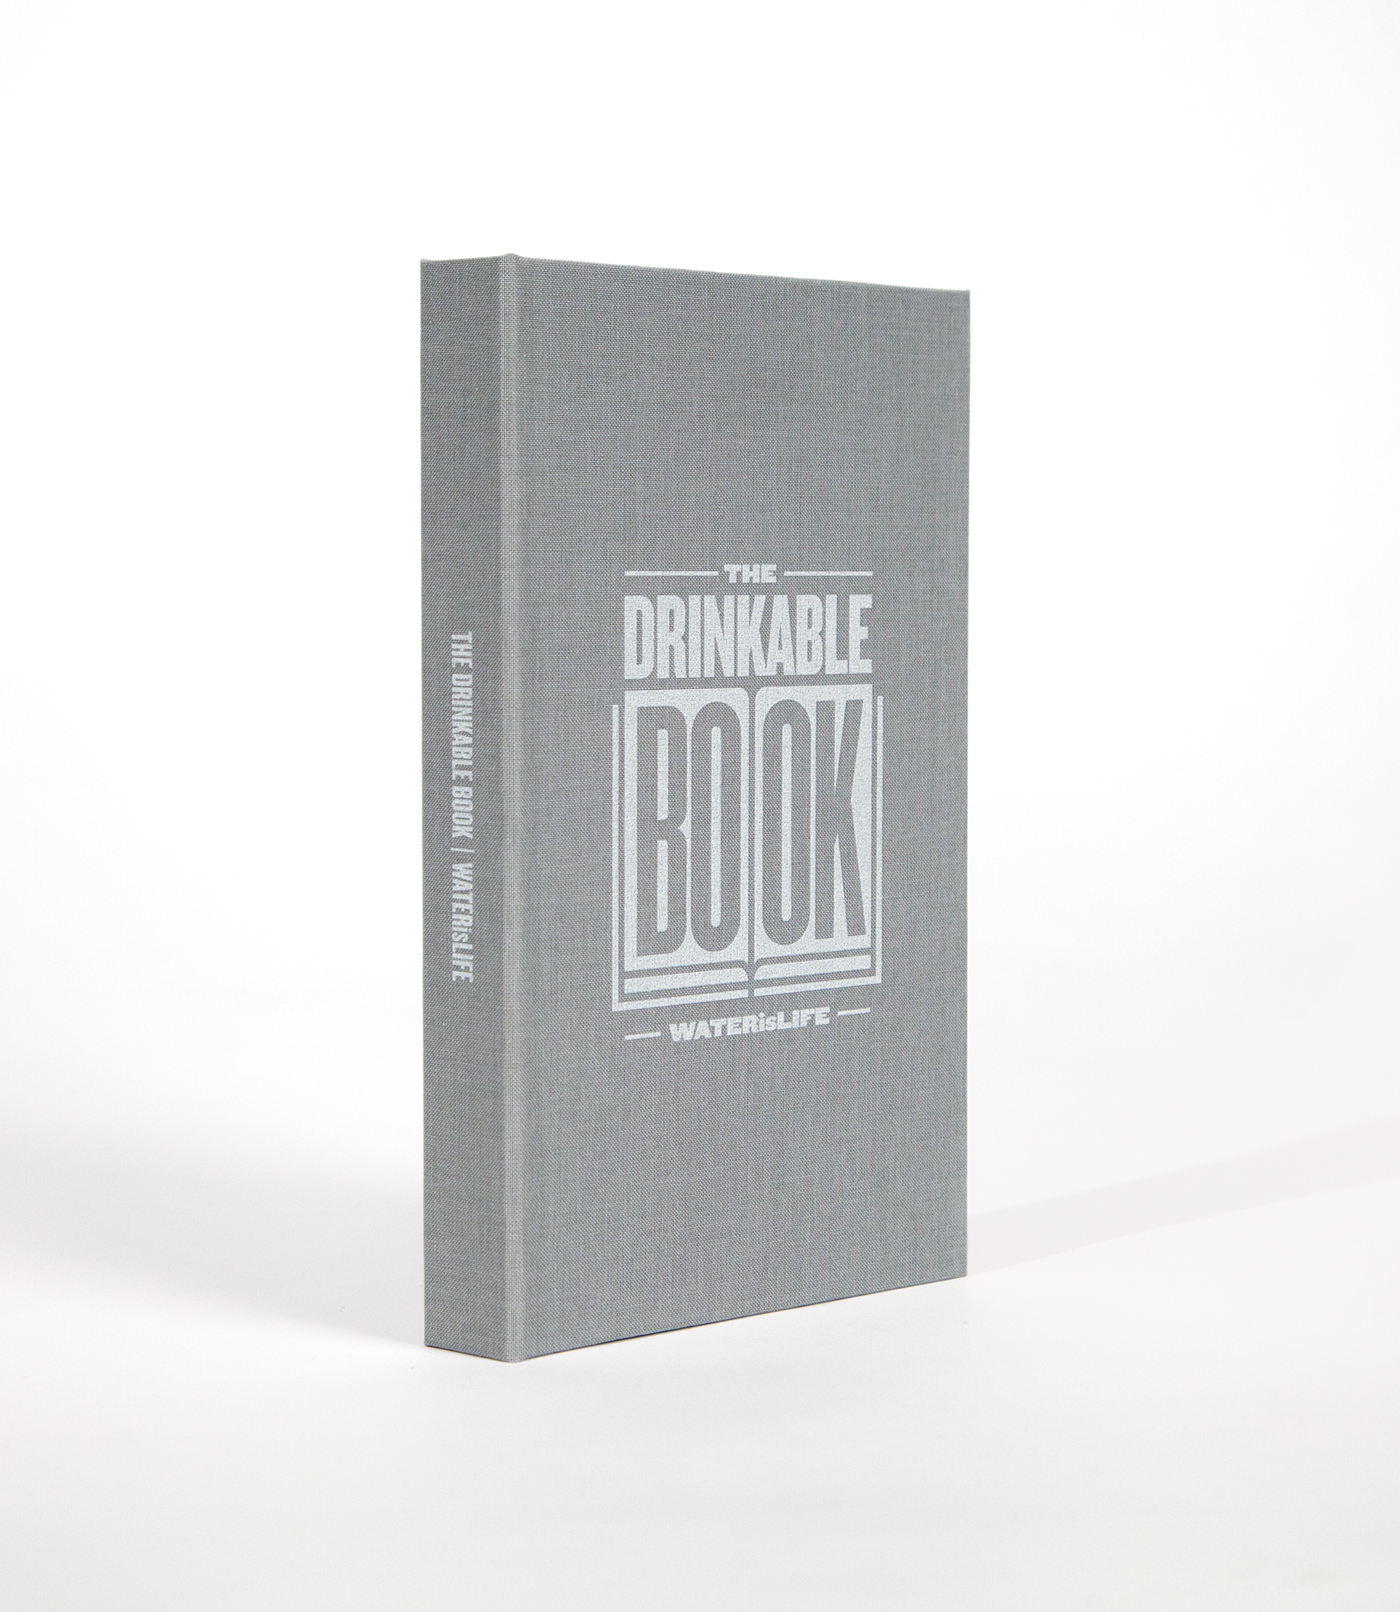 Drinkable Book Silver nanoparticles silver nanotechnology Technology chemistry science letterpress food-grade-ink Filtration purification Education Water crisis water knockout